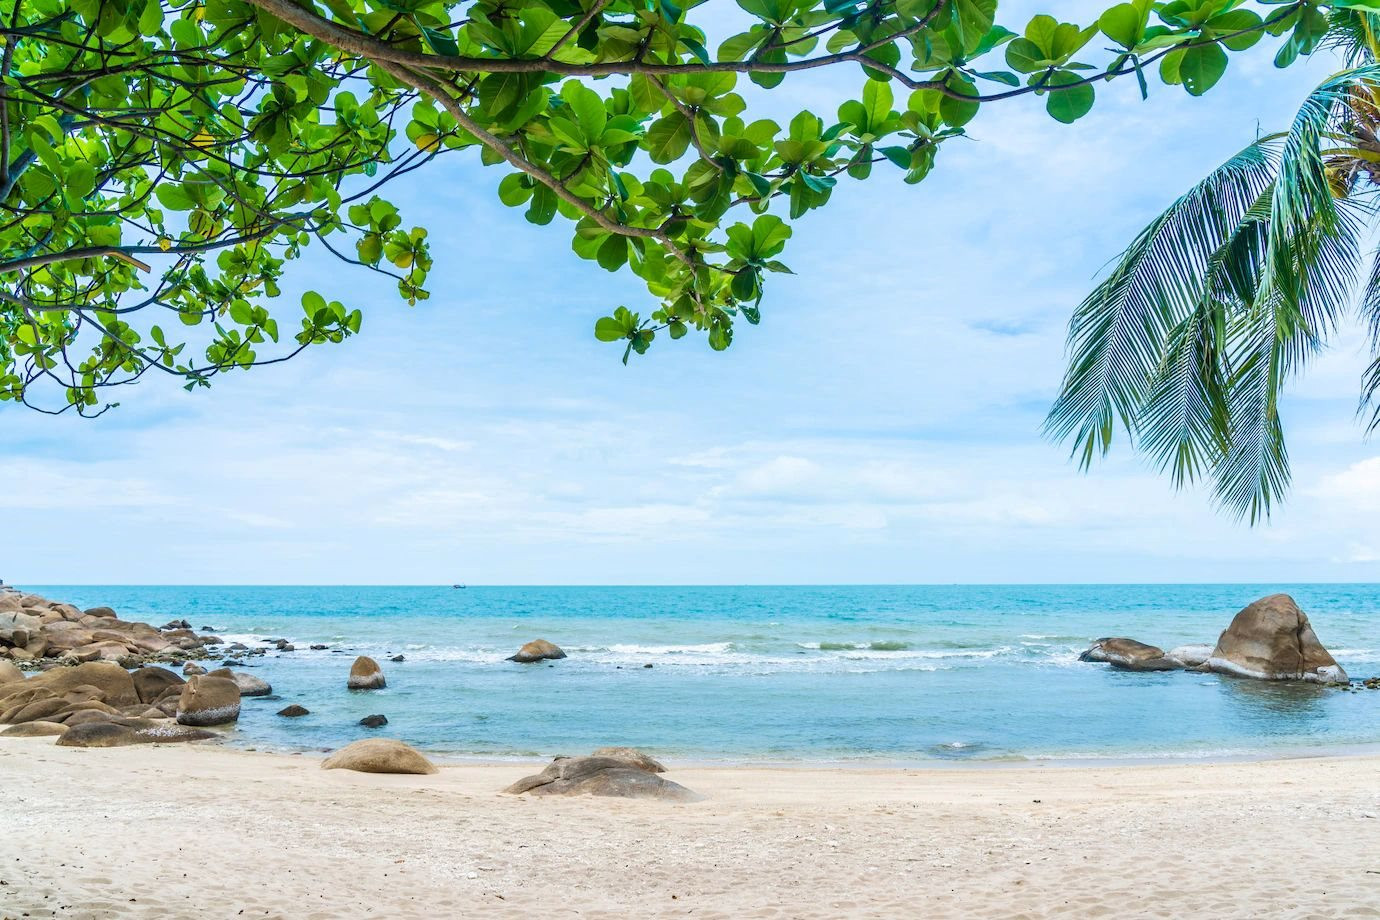 beautiful-outdoor-tropical-beach-sea-around-samui-island-with-coconut-palm-tree-other_74190-9001-compressed.jpg